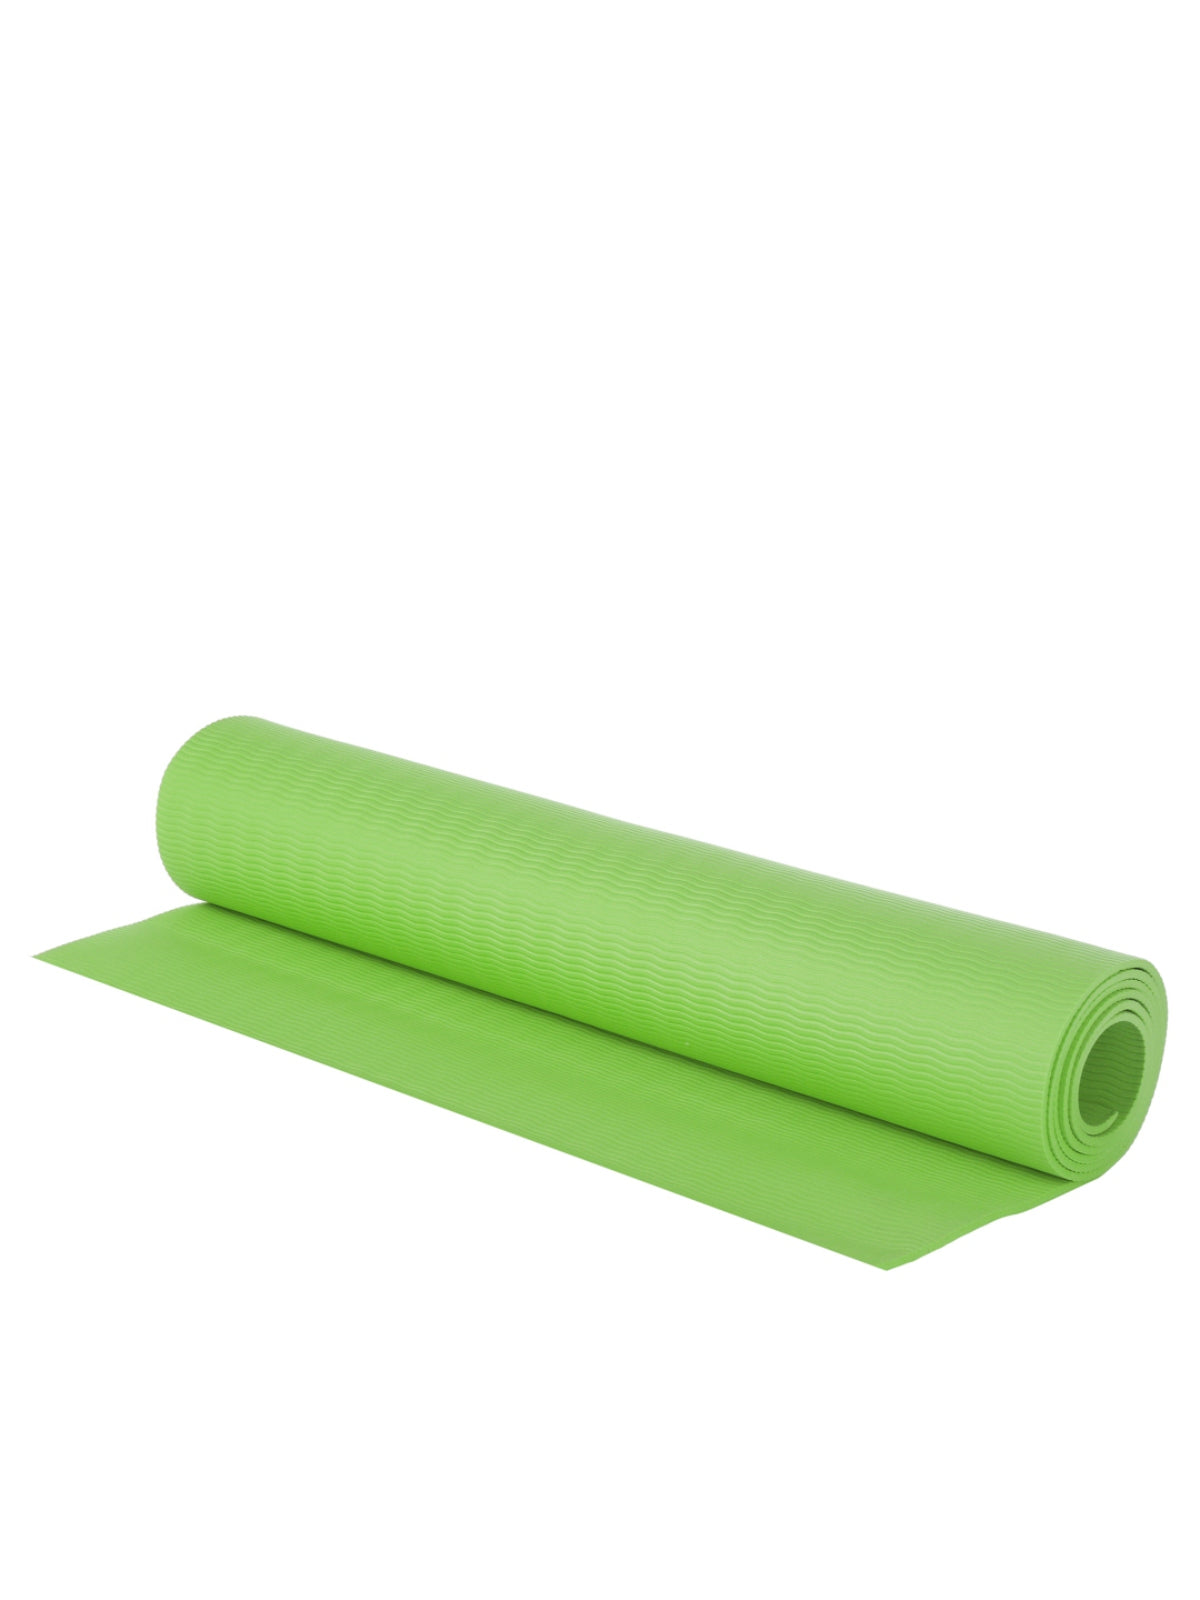 Anti Skid Gym/Exercise/Yoga Mat for Men & Women with Cover Bag - Green (4 MM)